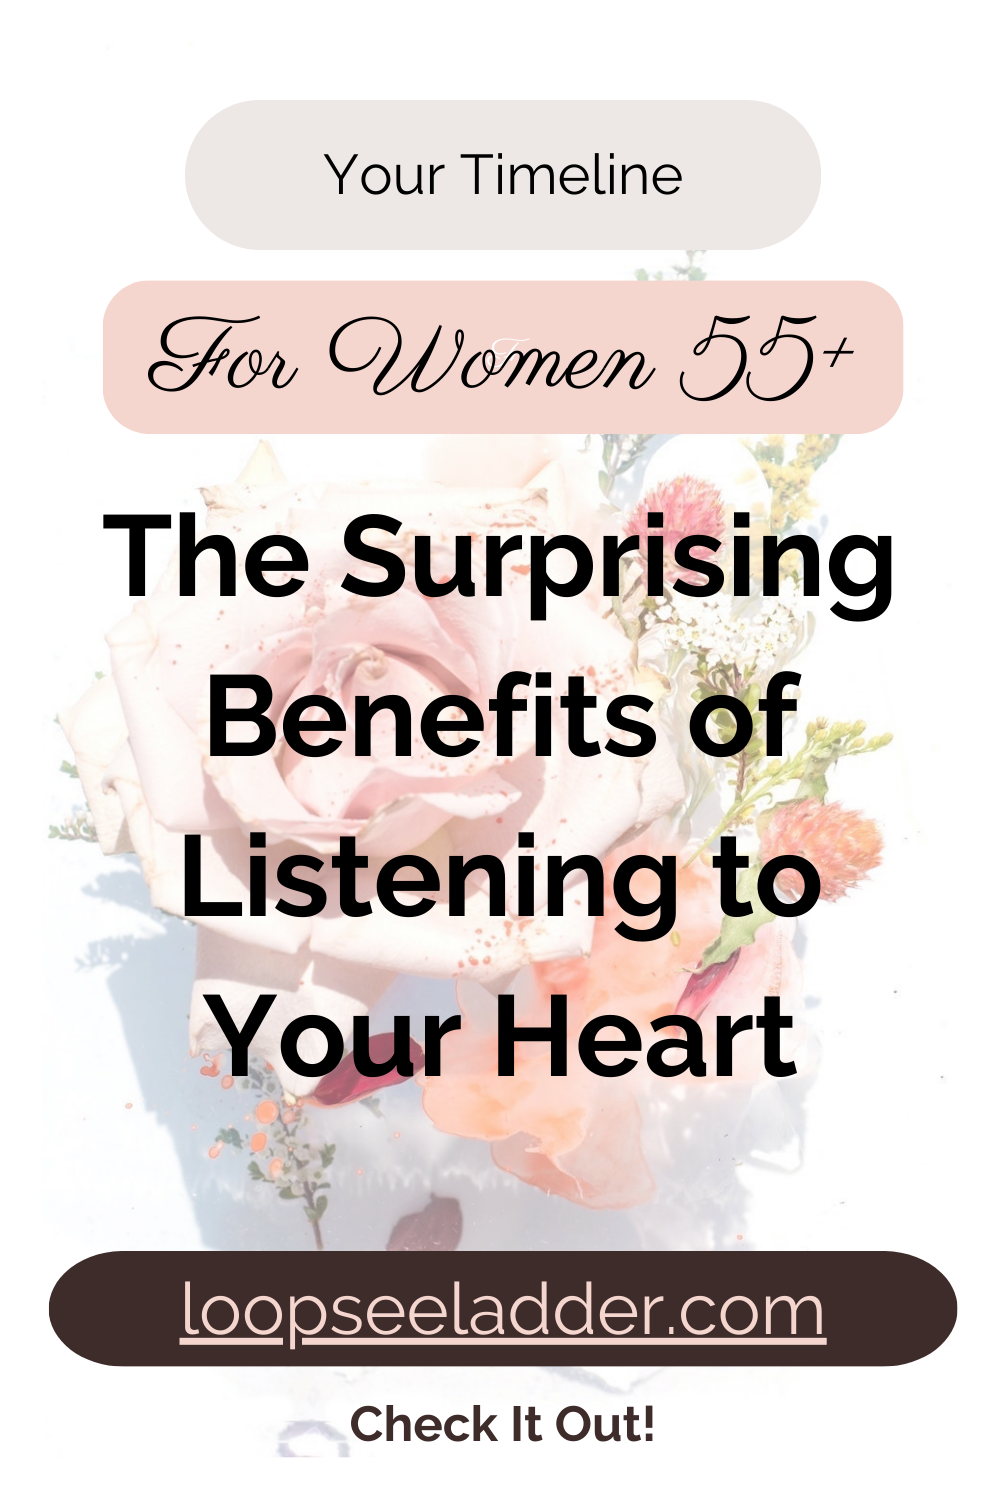 The Surprising Benefits of Listening to Your Heart for Women 55+